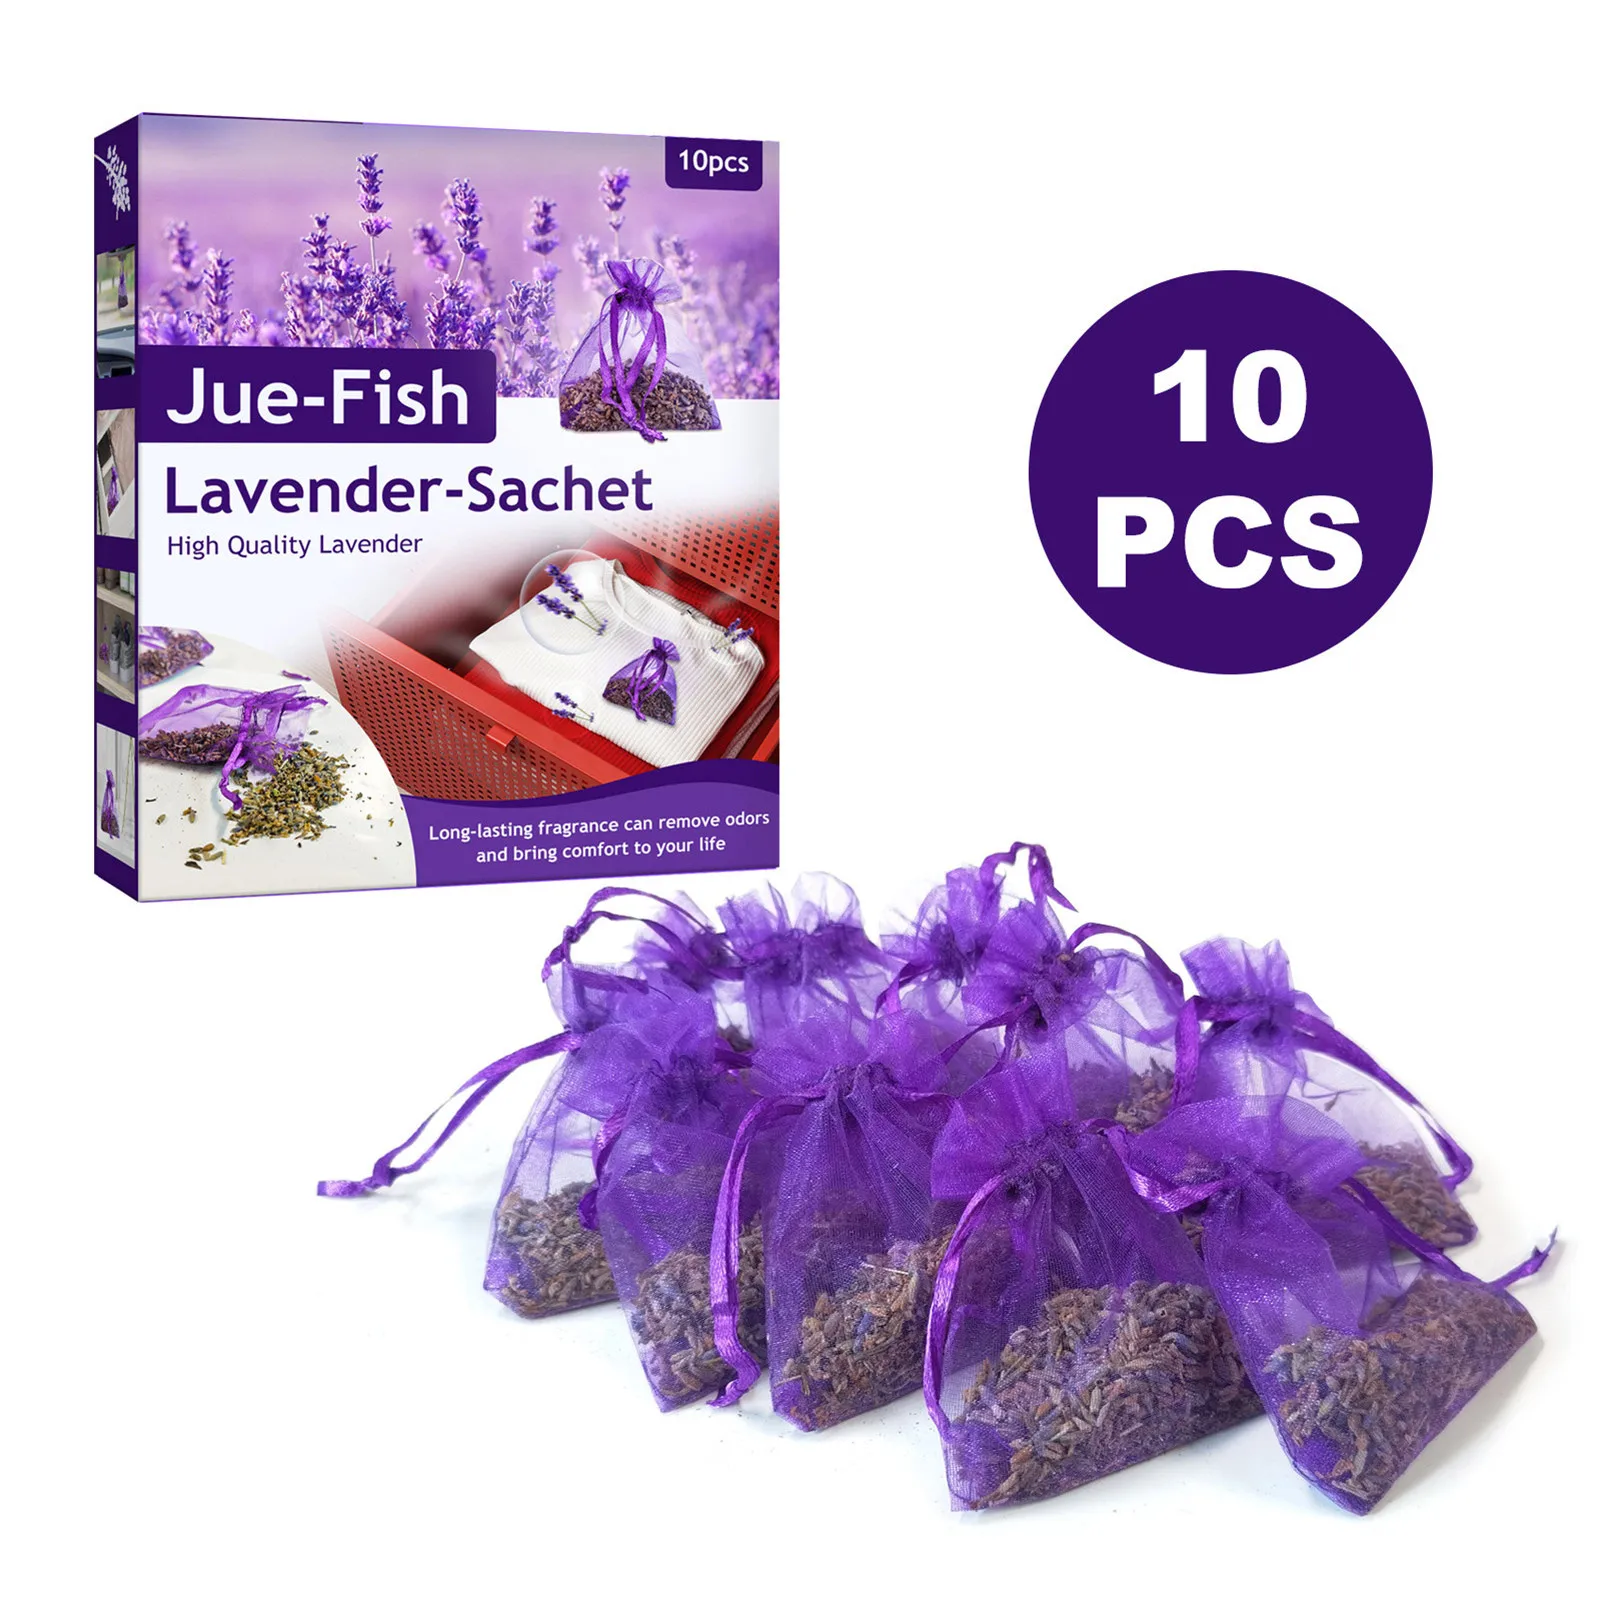 

Lavender Sachet 10pcs Home Fragrance Sachets Dried Lavender Packets for Drawers Closets Deodorizers Fresh Scents for Home Office